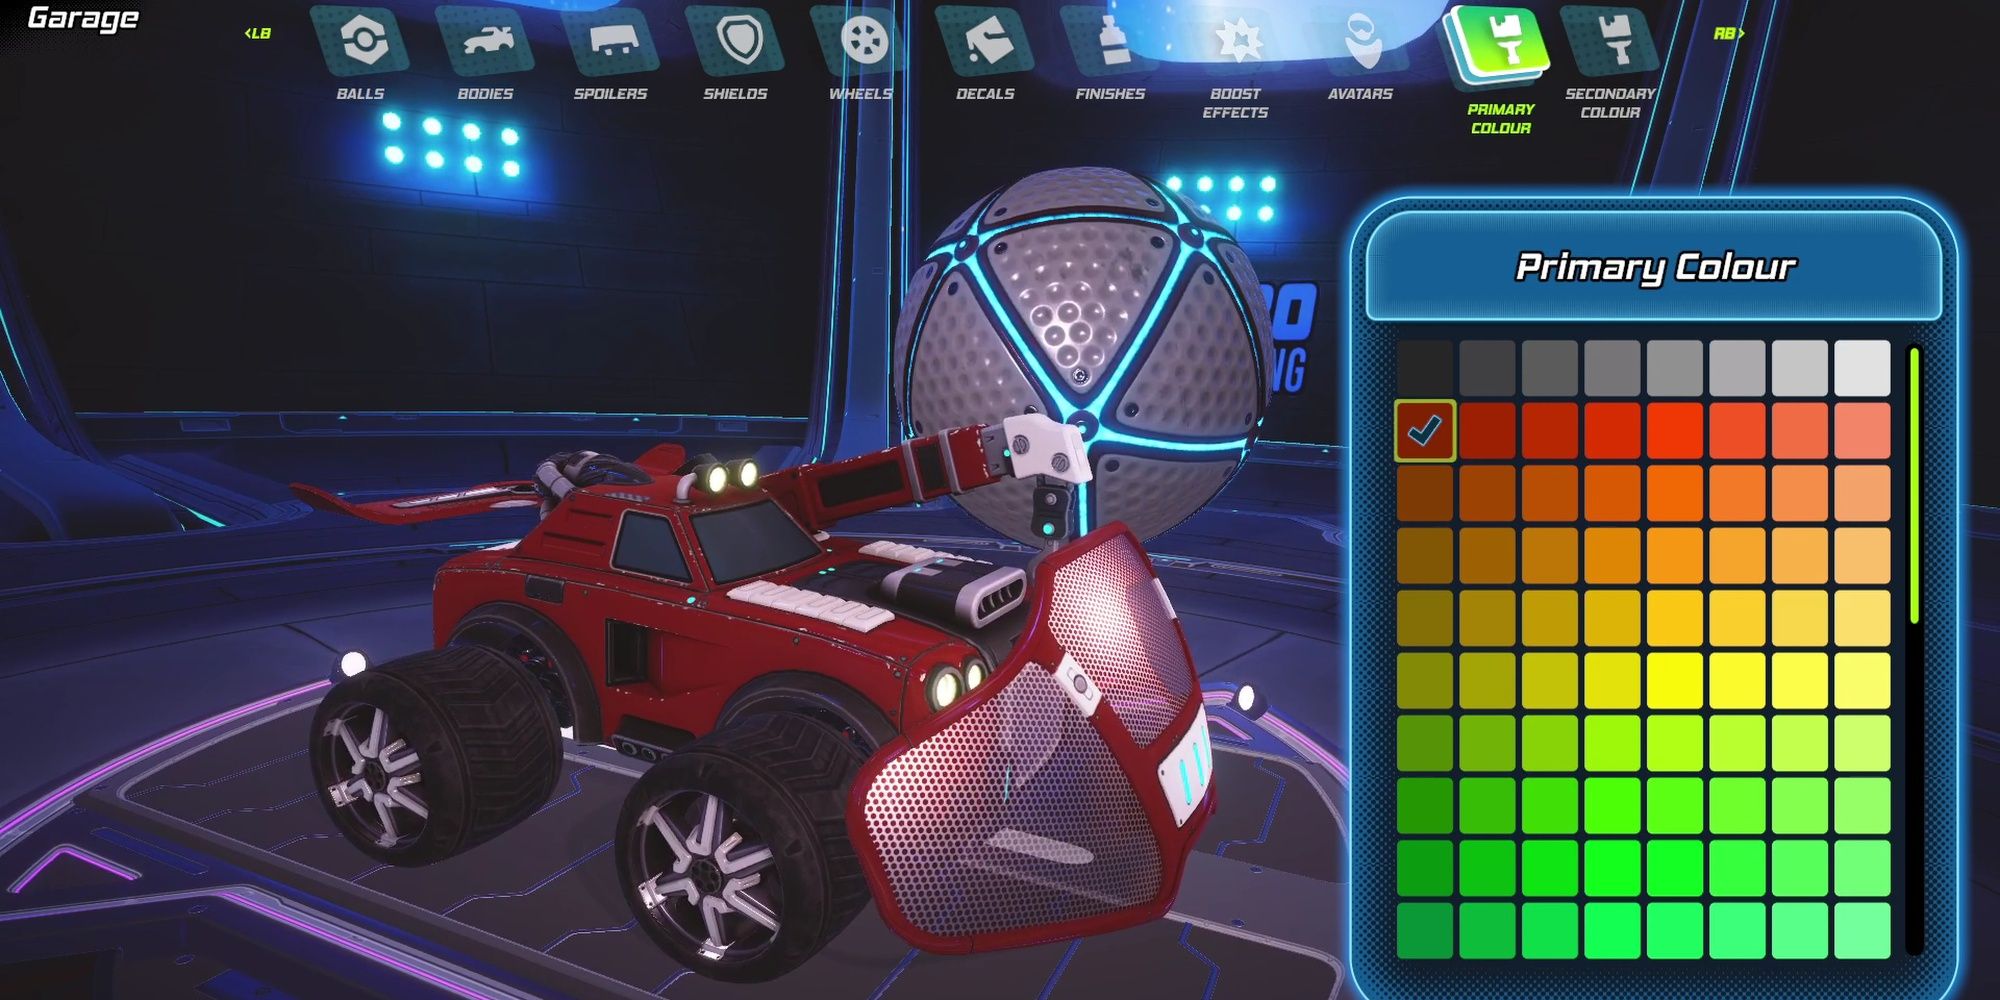 Turbo Golf Racing: Customisation Options For The Car